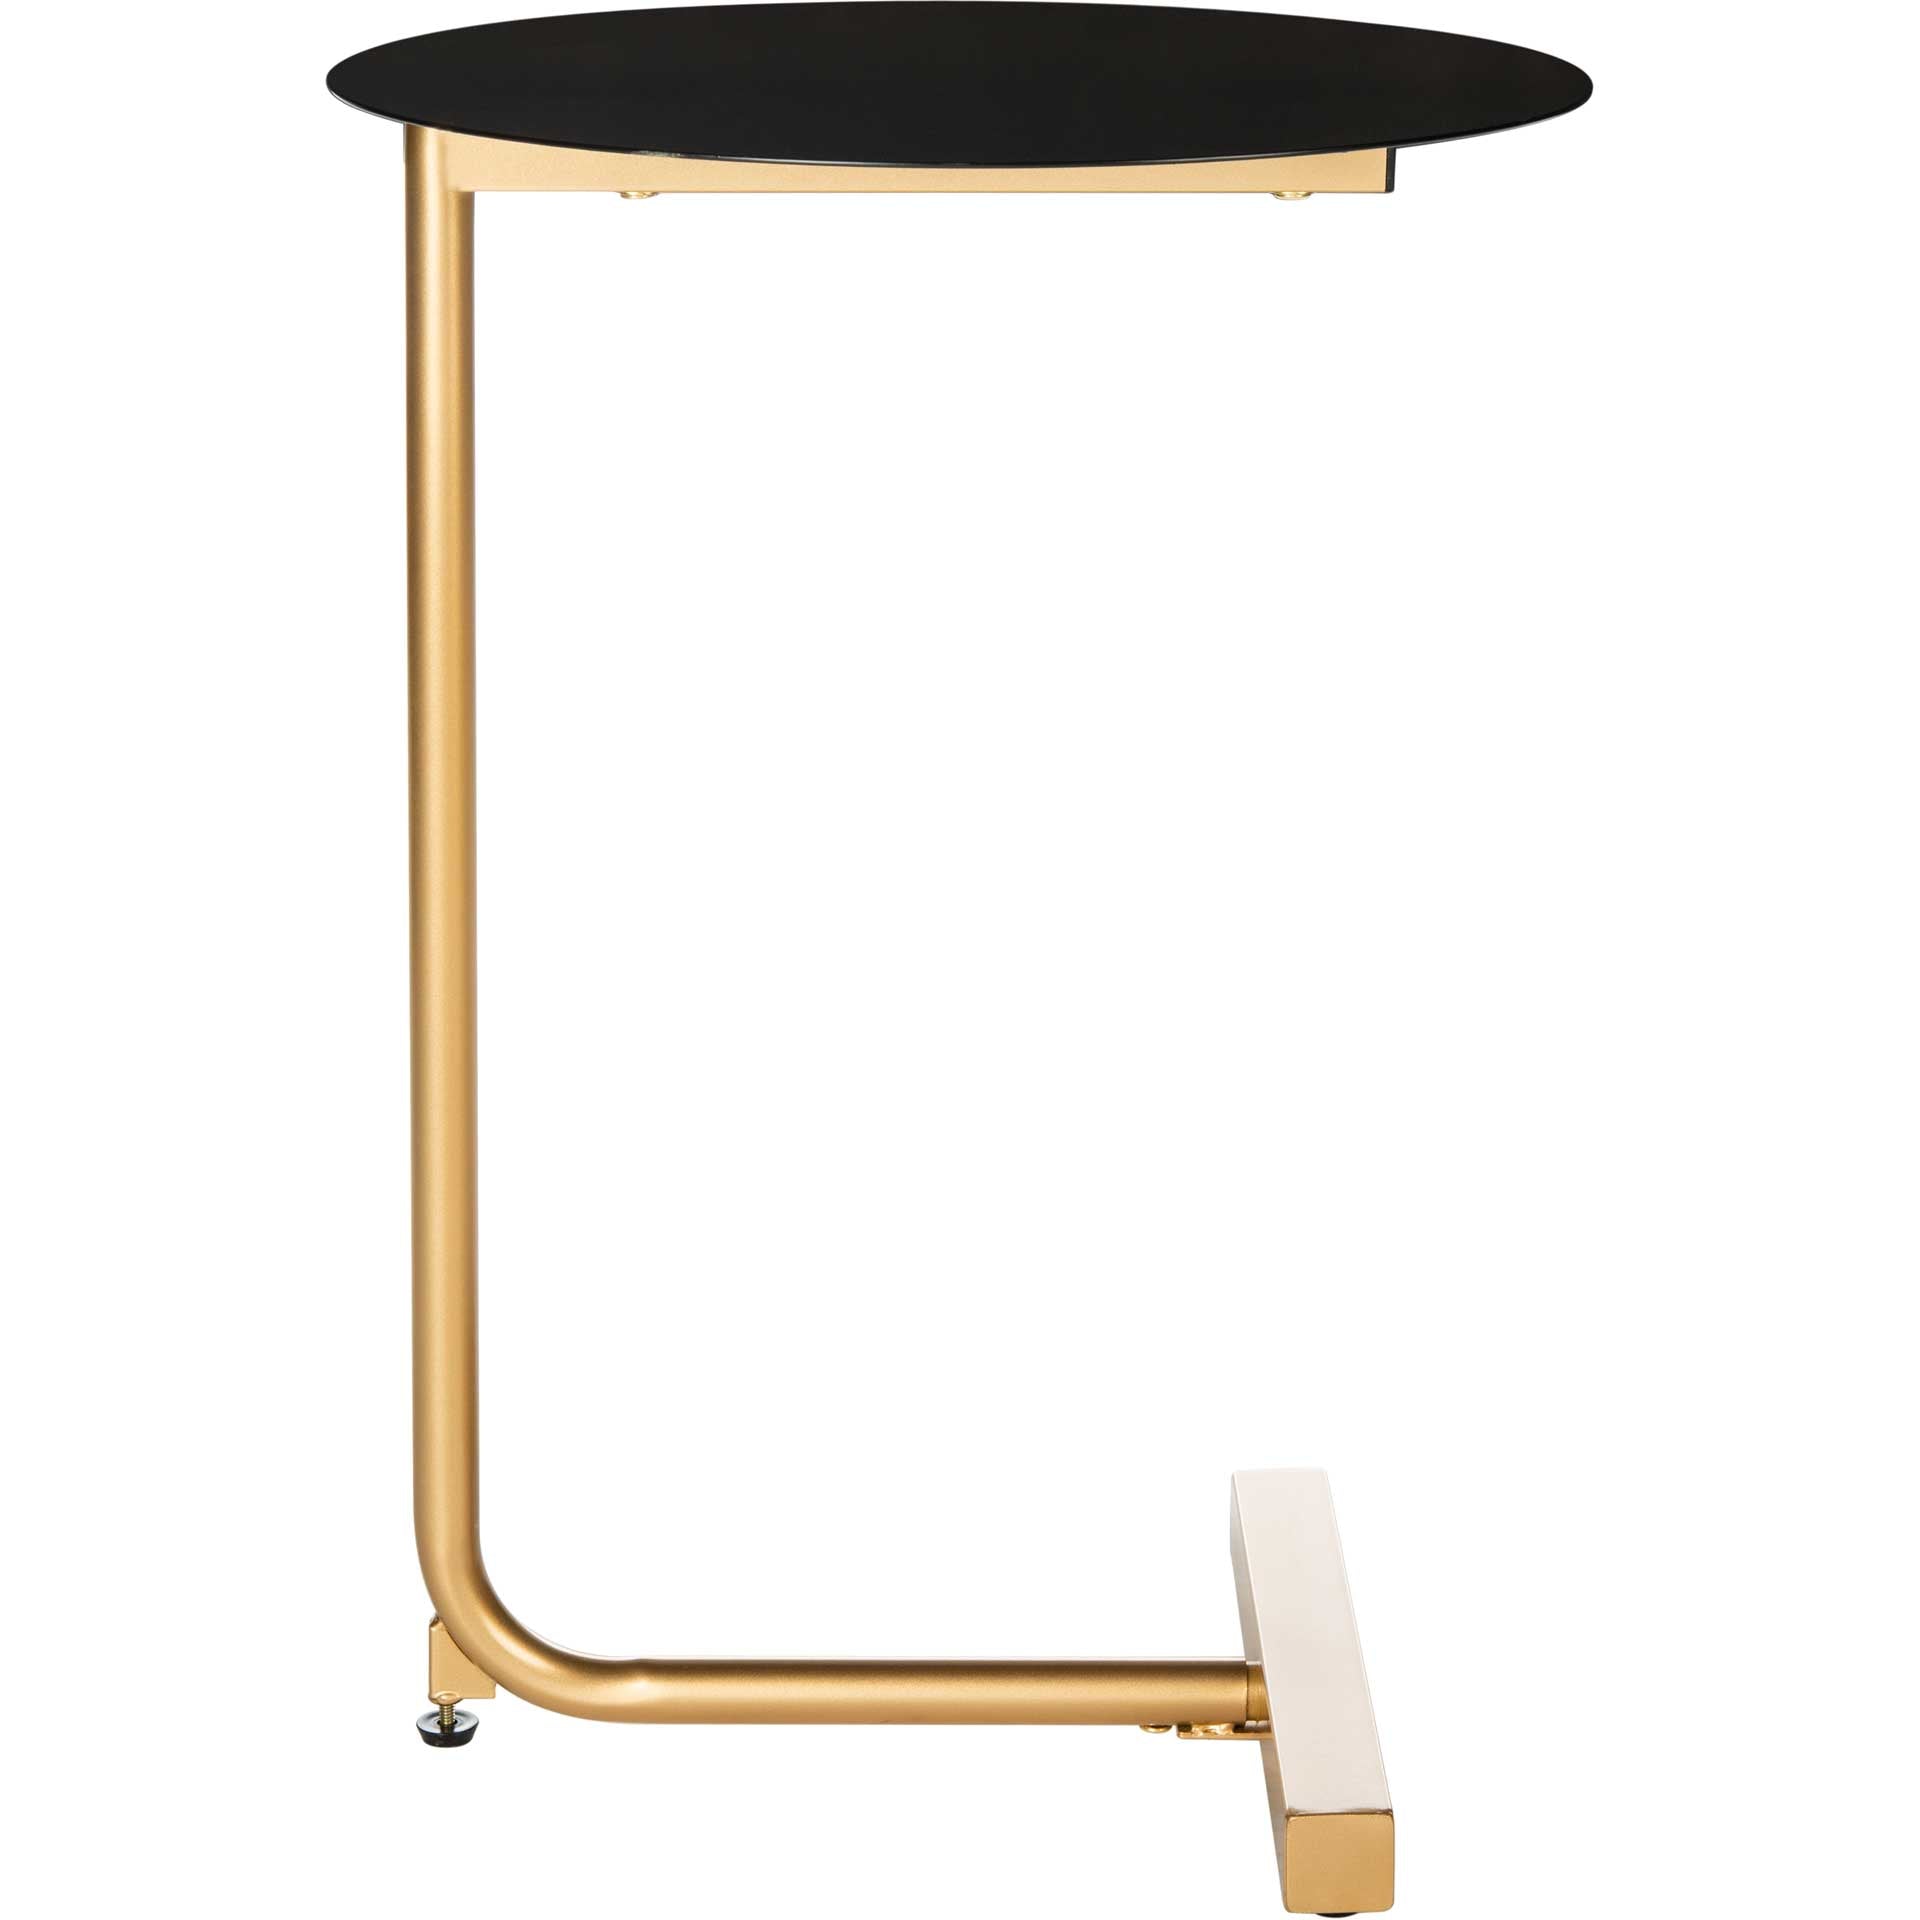 Harlyn Round Side Table Black/Gold